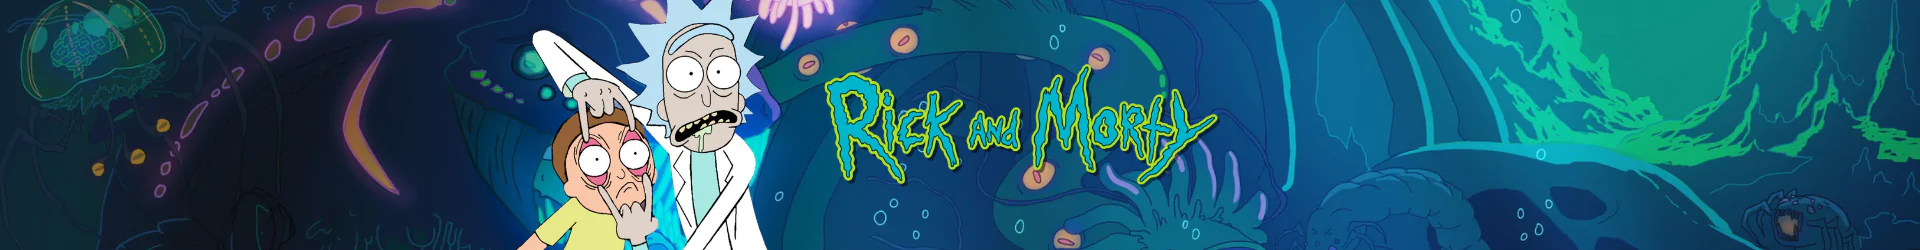 Rick and Morty plakate banner